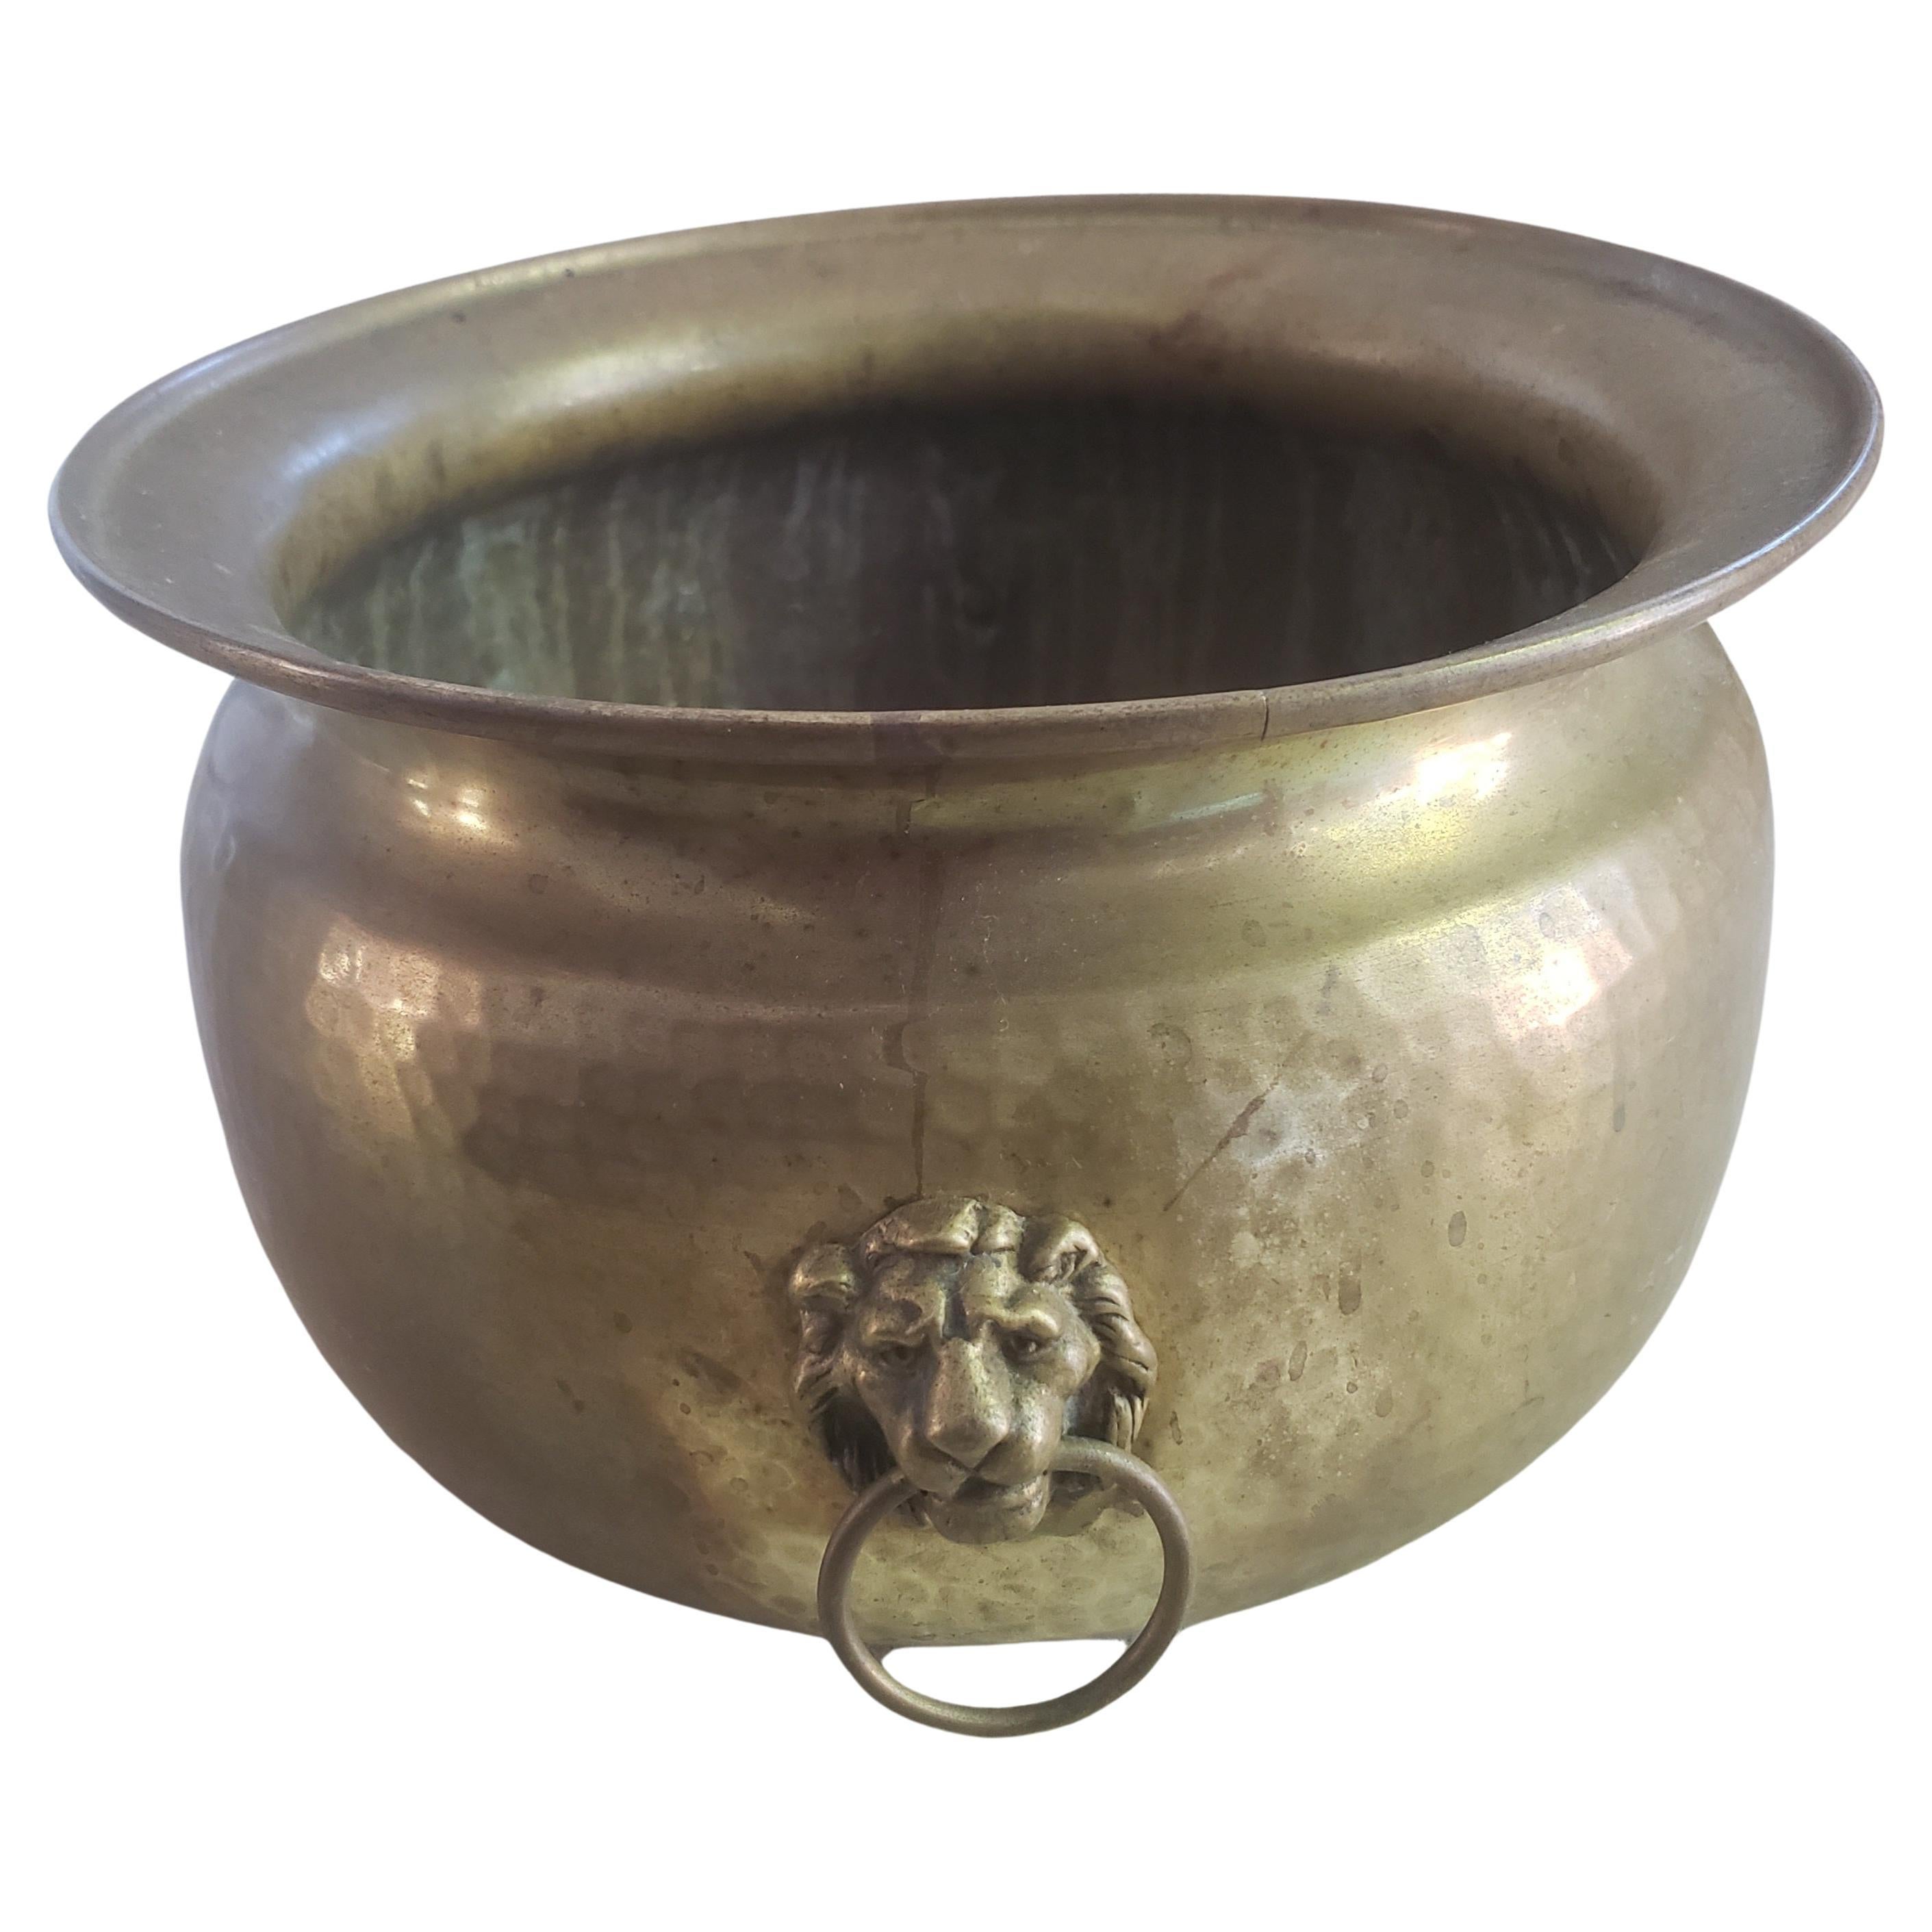 Late 19th century J P Mook Brass Planter Jardiniere with Lion Heads Handles.
Measures 15